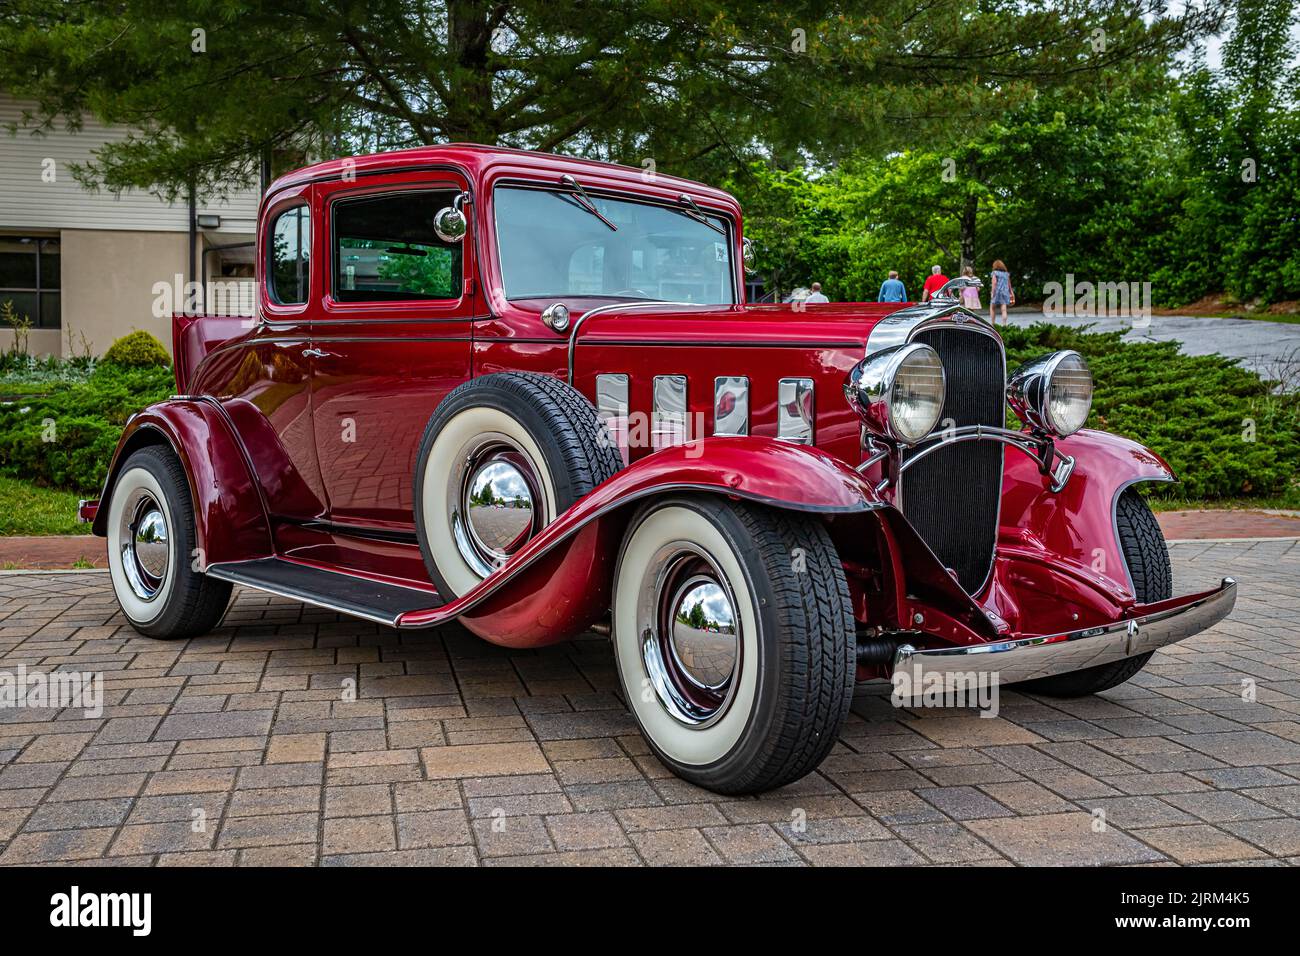 Highlands, NC - June 10, 2022: Low perspective front corner view of a 1932 Chevrolet Rumble Seat Coupe at a local car show. Stock Photo